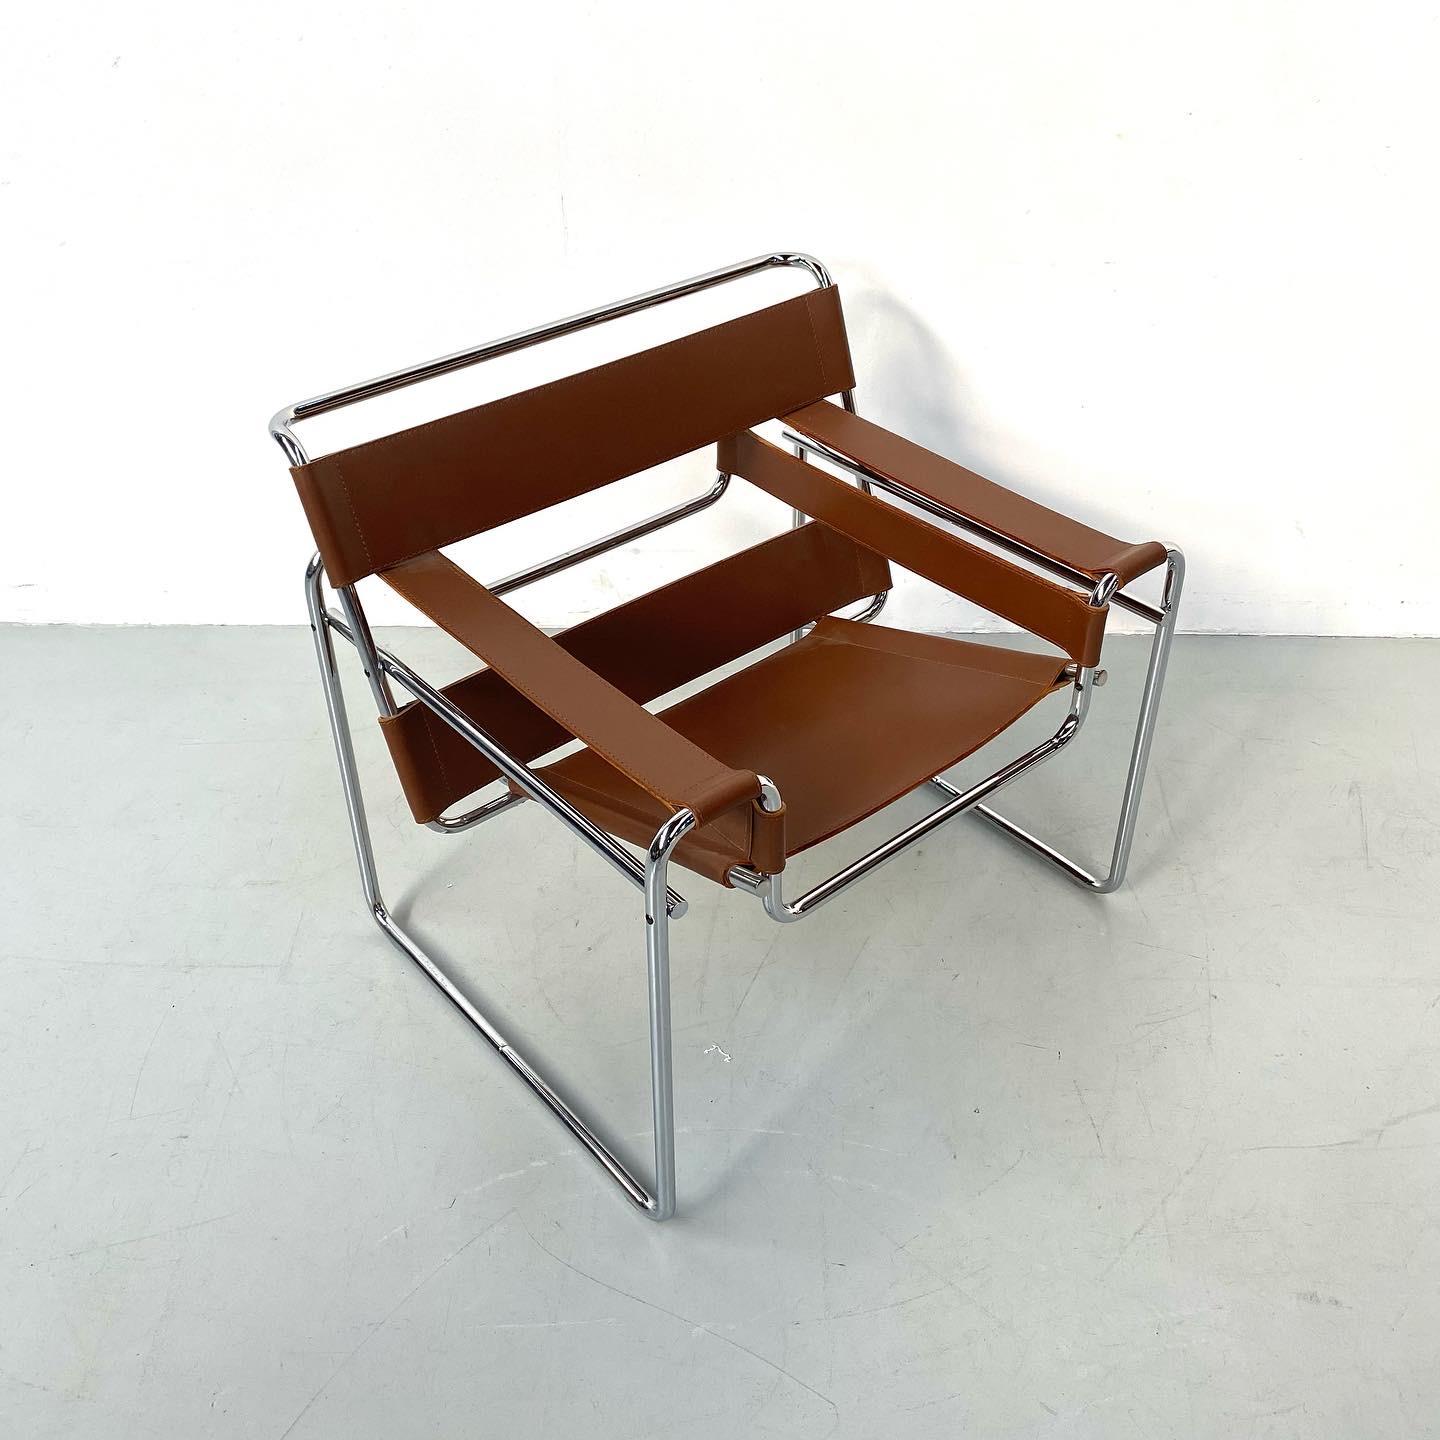 This cognac leather and chromed steel B3 or Wassily chair was designed by Marcel Breuer for Knoll in 1925.
Marcel Breuer's (1902, Hungary) inspiration for the Wassily Chair came when he bought his first bicycle at the age of 23. The frame and the